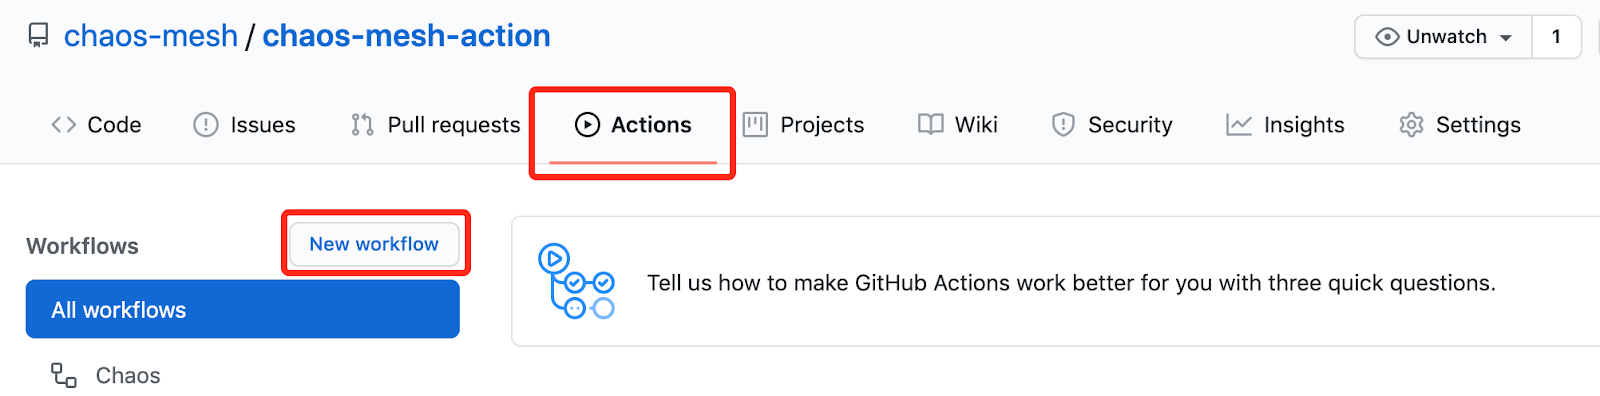 Creating a new GitHub workflow